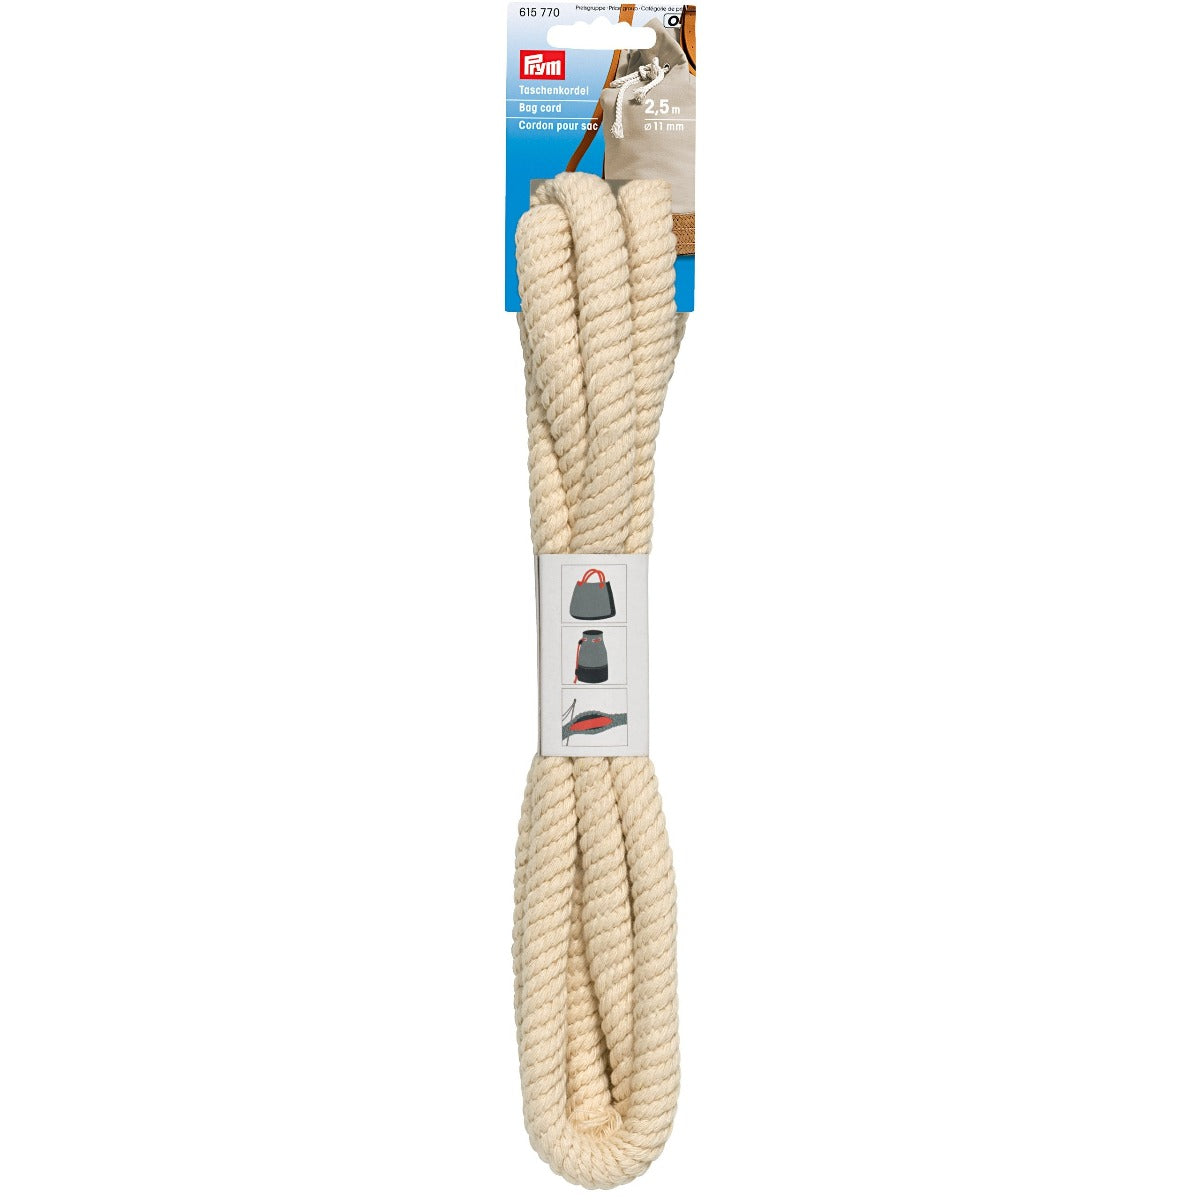 Prym Heavy cord for bag making from Jaycotts Sewing Supplies